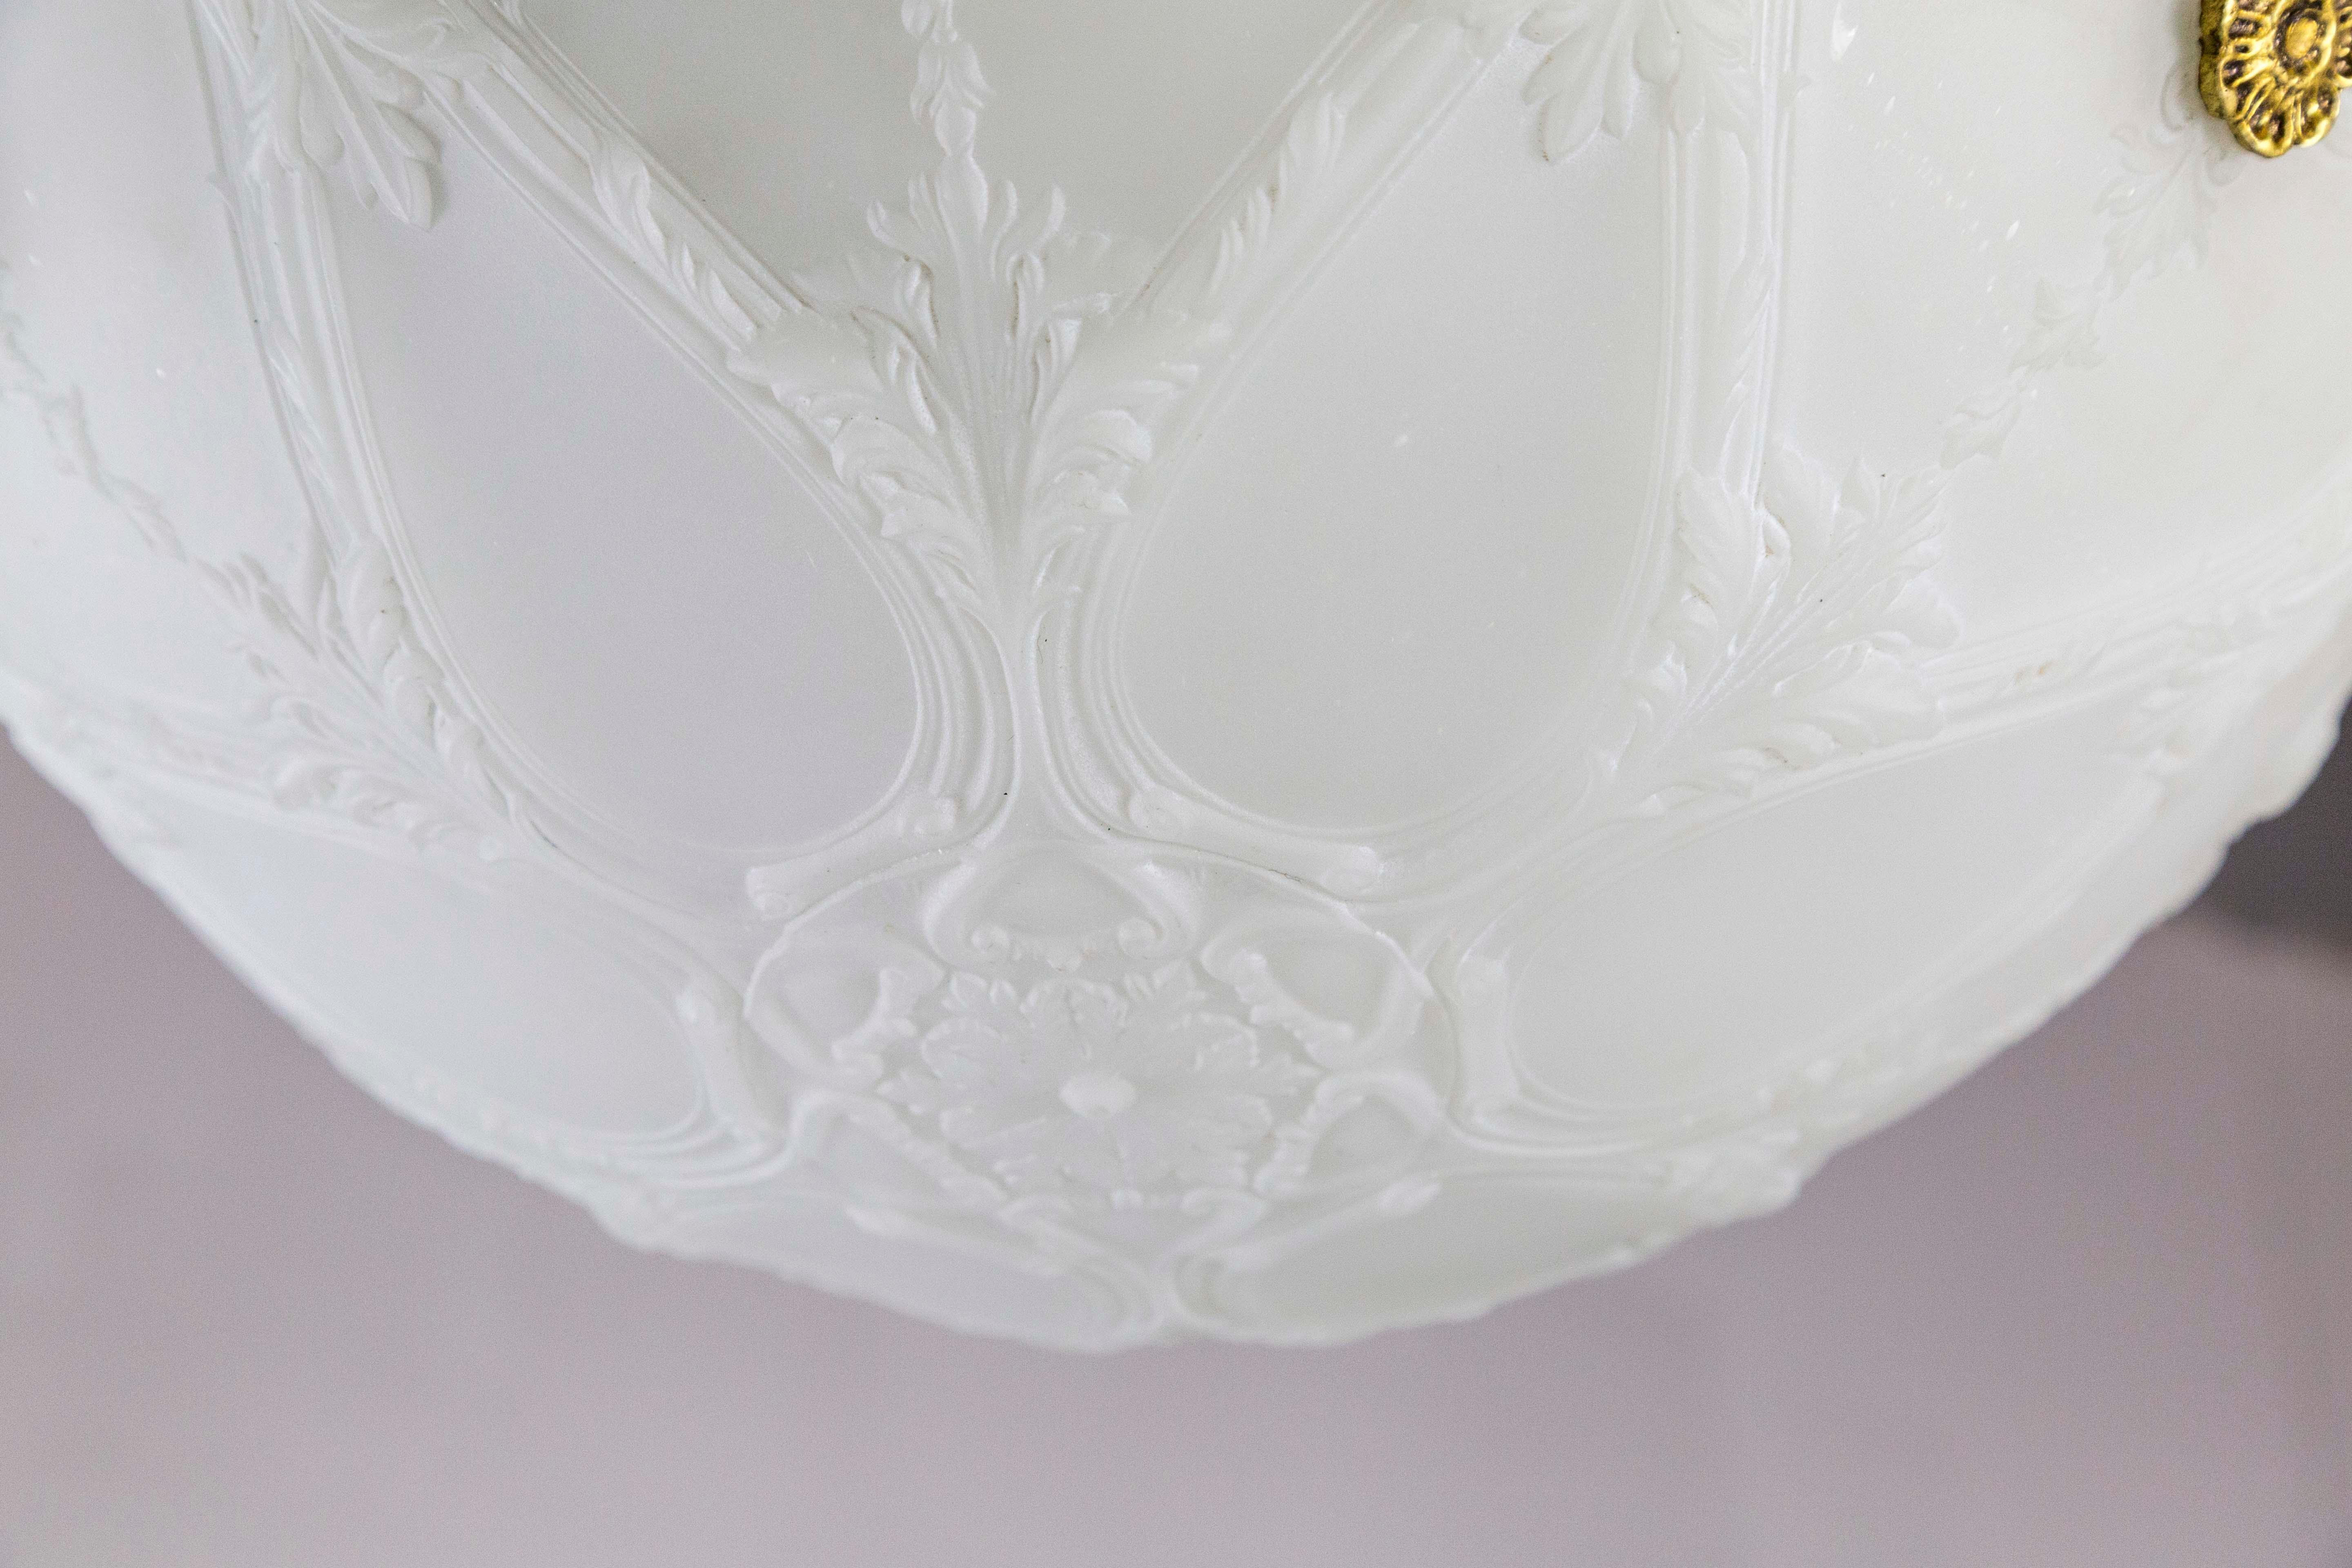 Early 1900s Neoclassical Detailed Milk Glass Bowl Pendant Light W/ Unique Chain For Sale 1